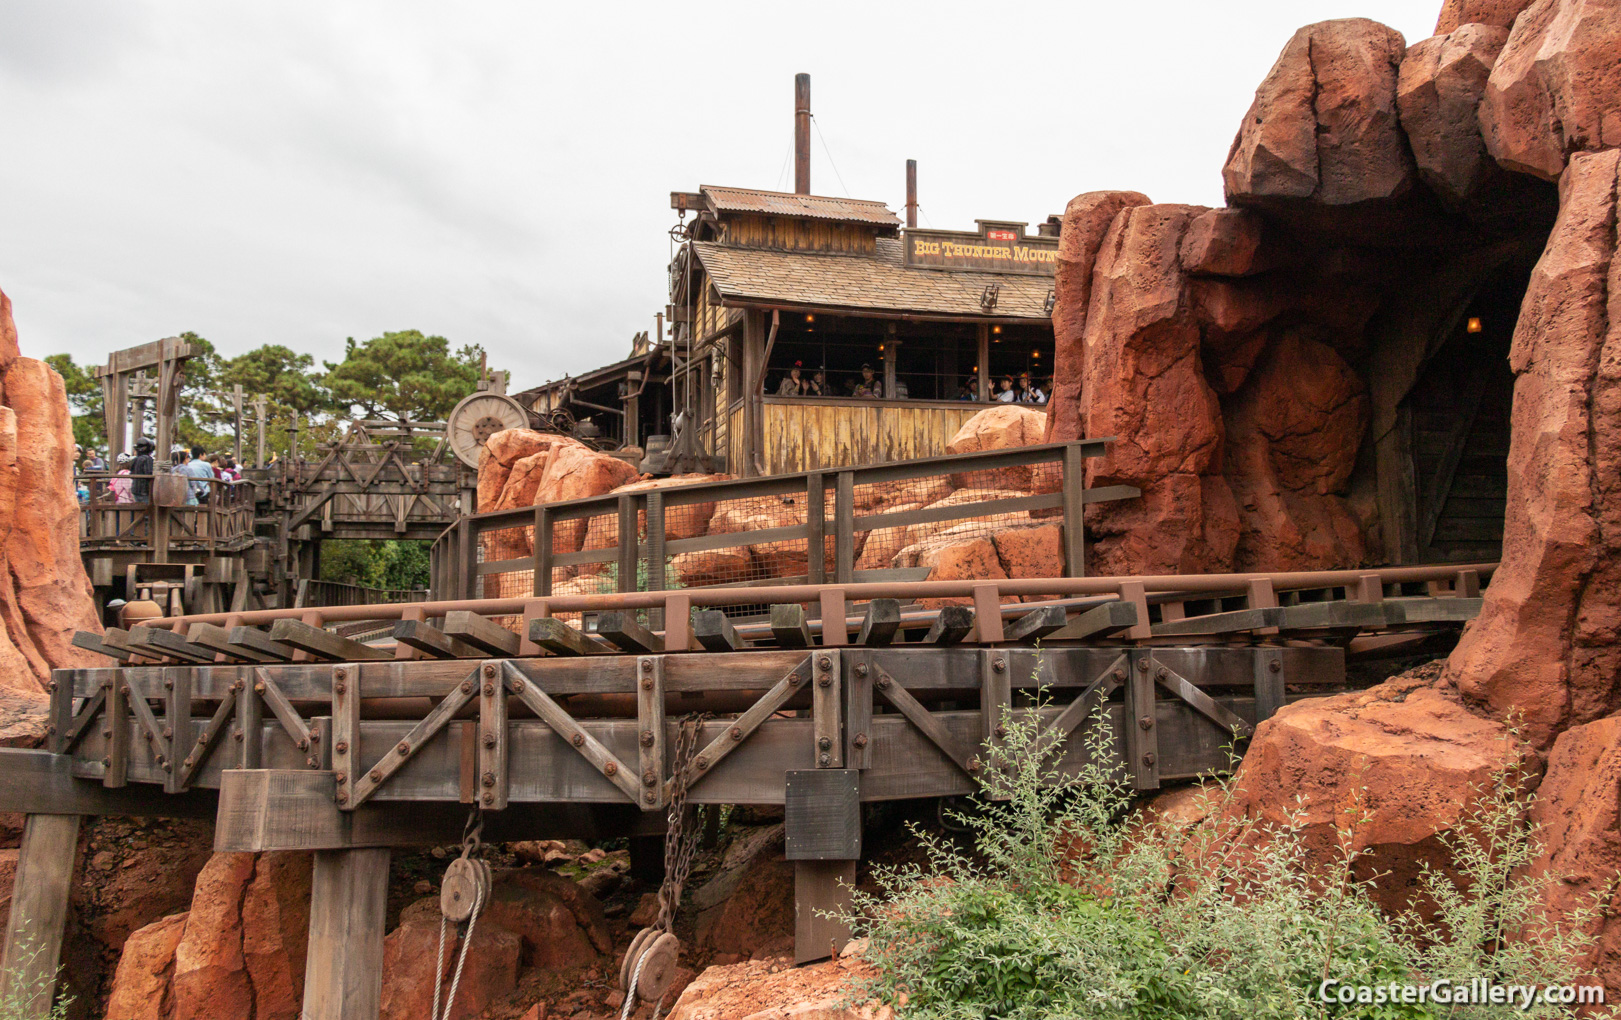 Pictures of the Big Thunder Mountain Railroad roller coaster at Tokyo Disneyland in Japan